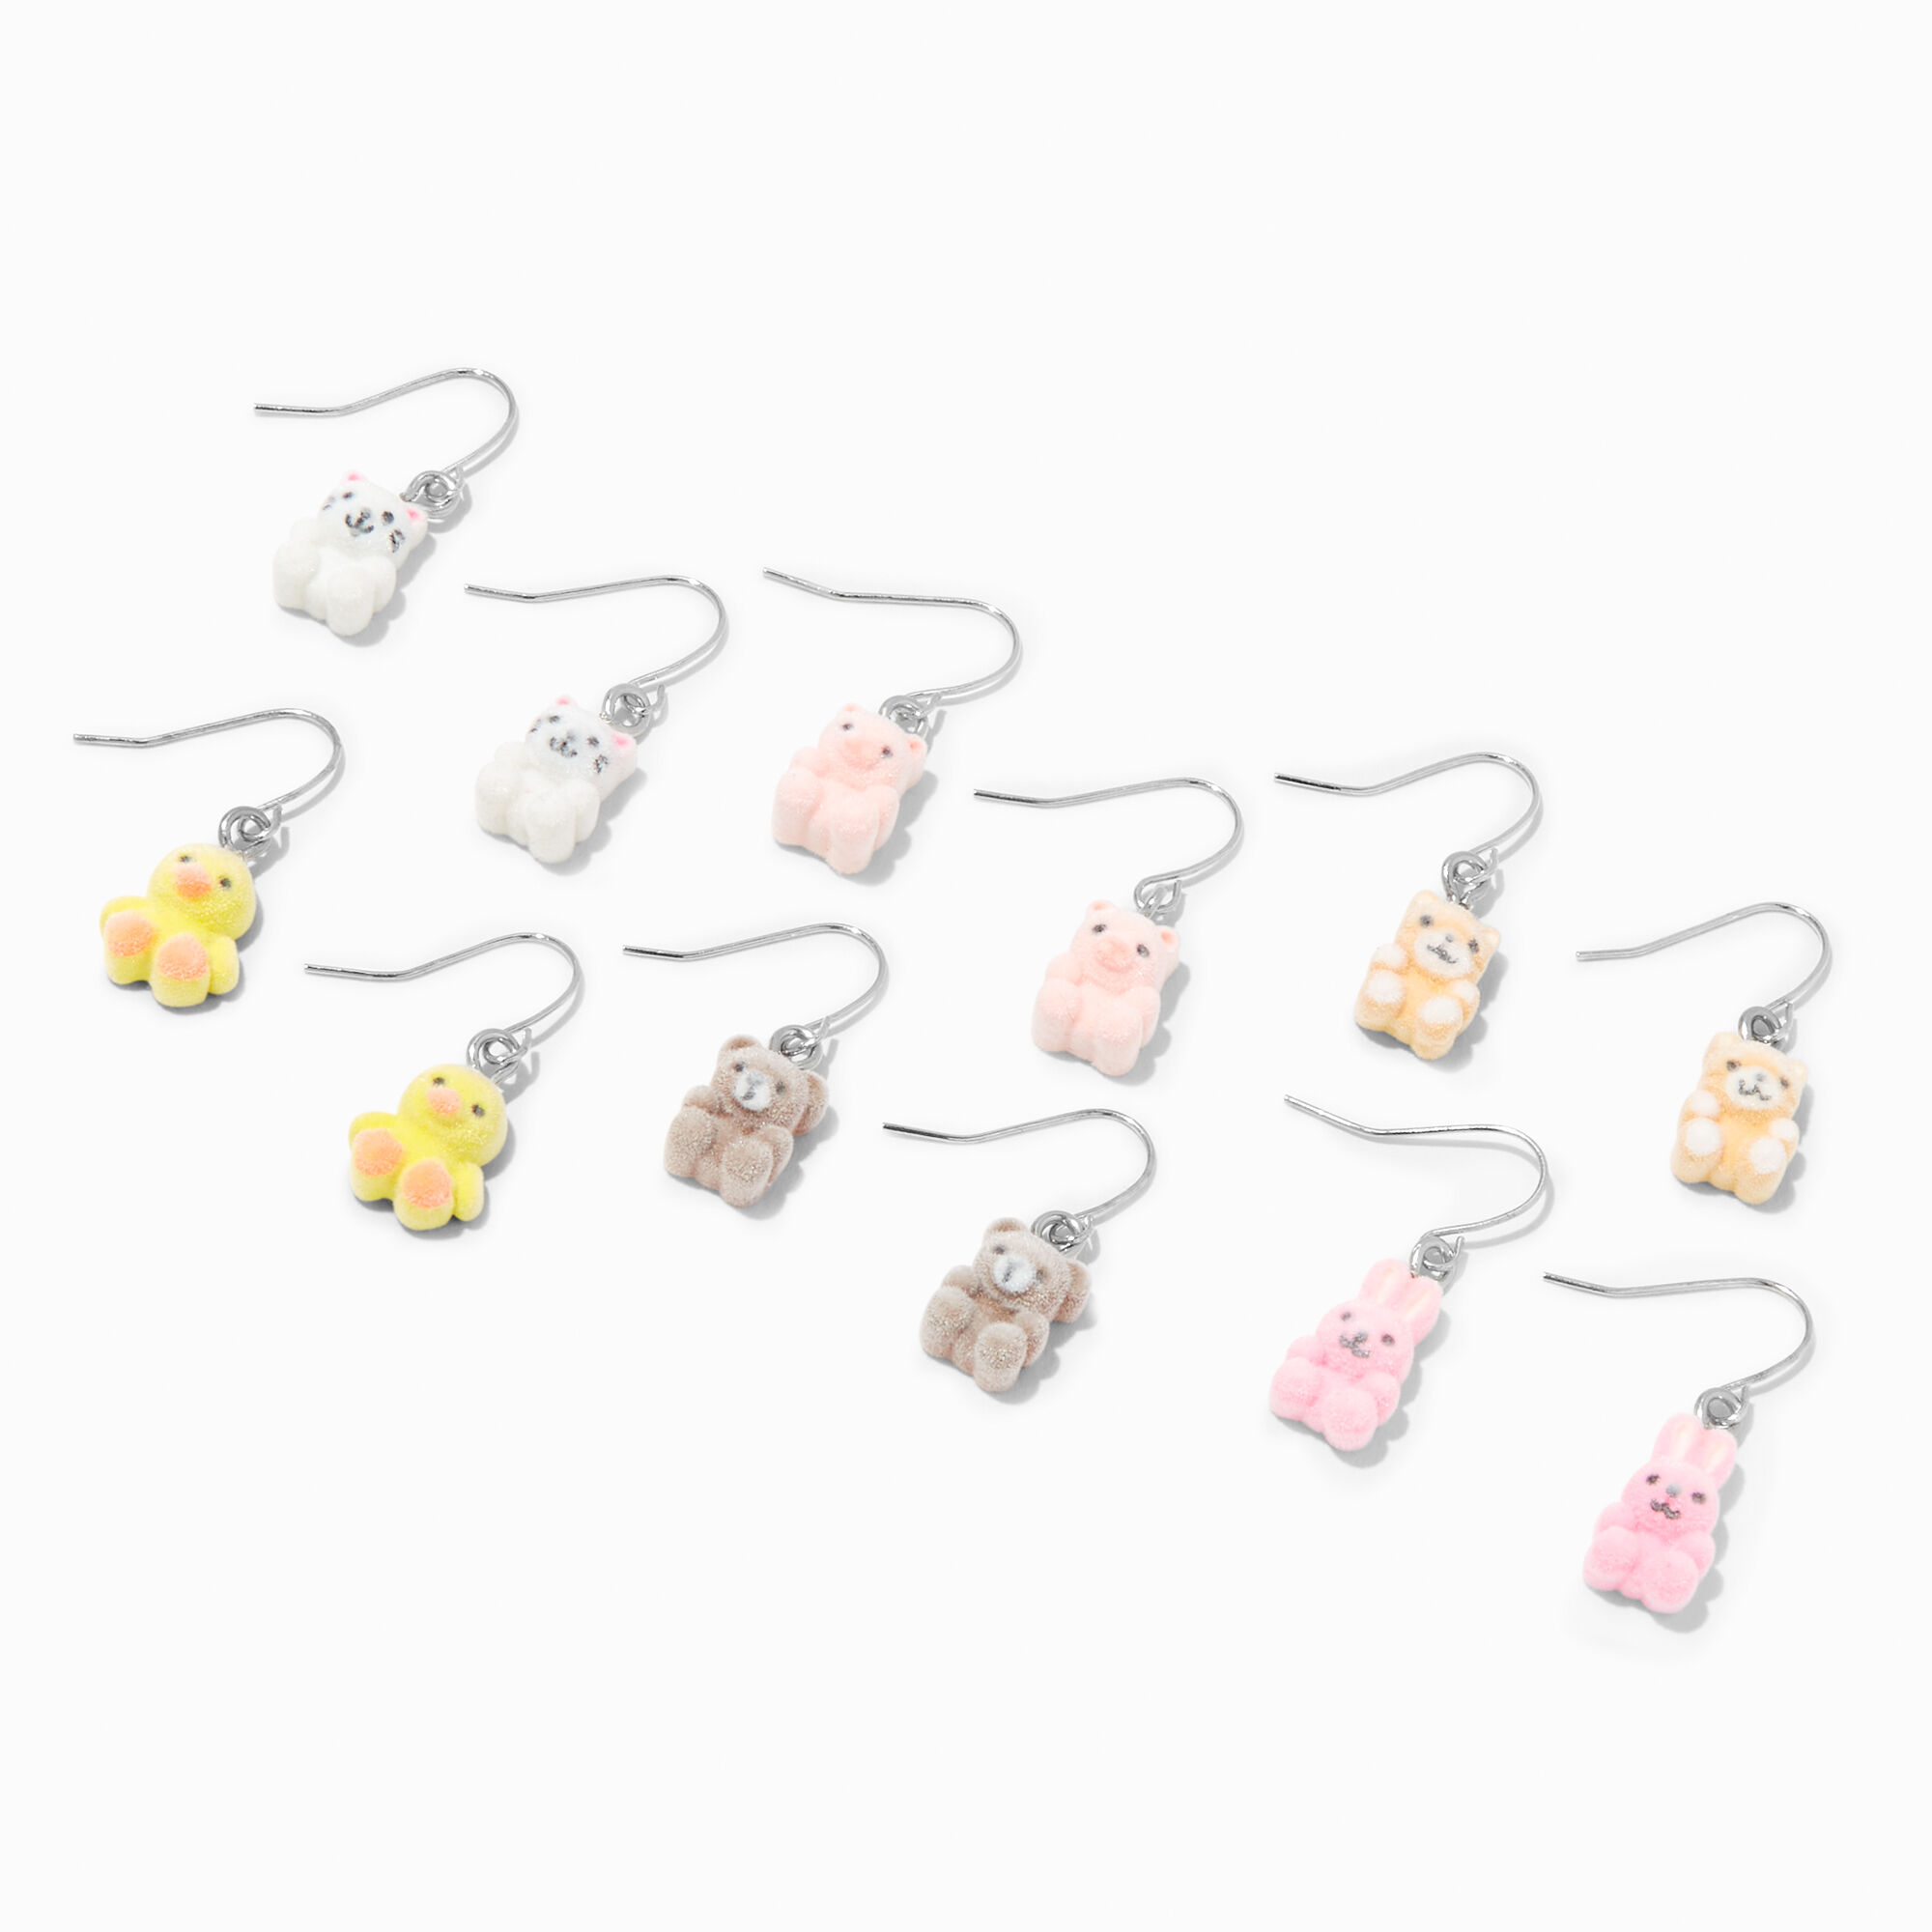 View Claires Fuzzy Animal 05 Drop Earrings 6 Pack Silver information